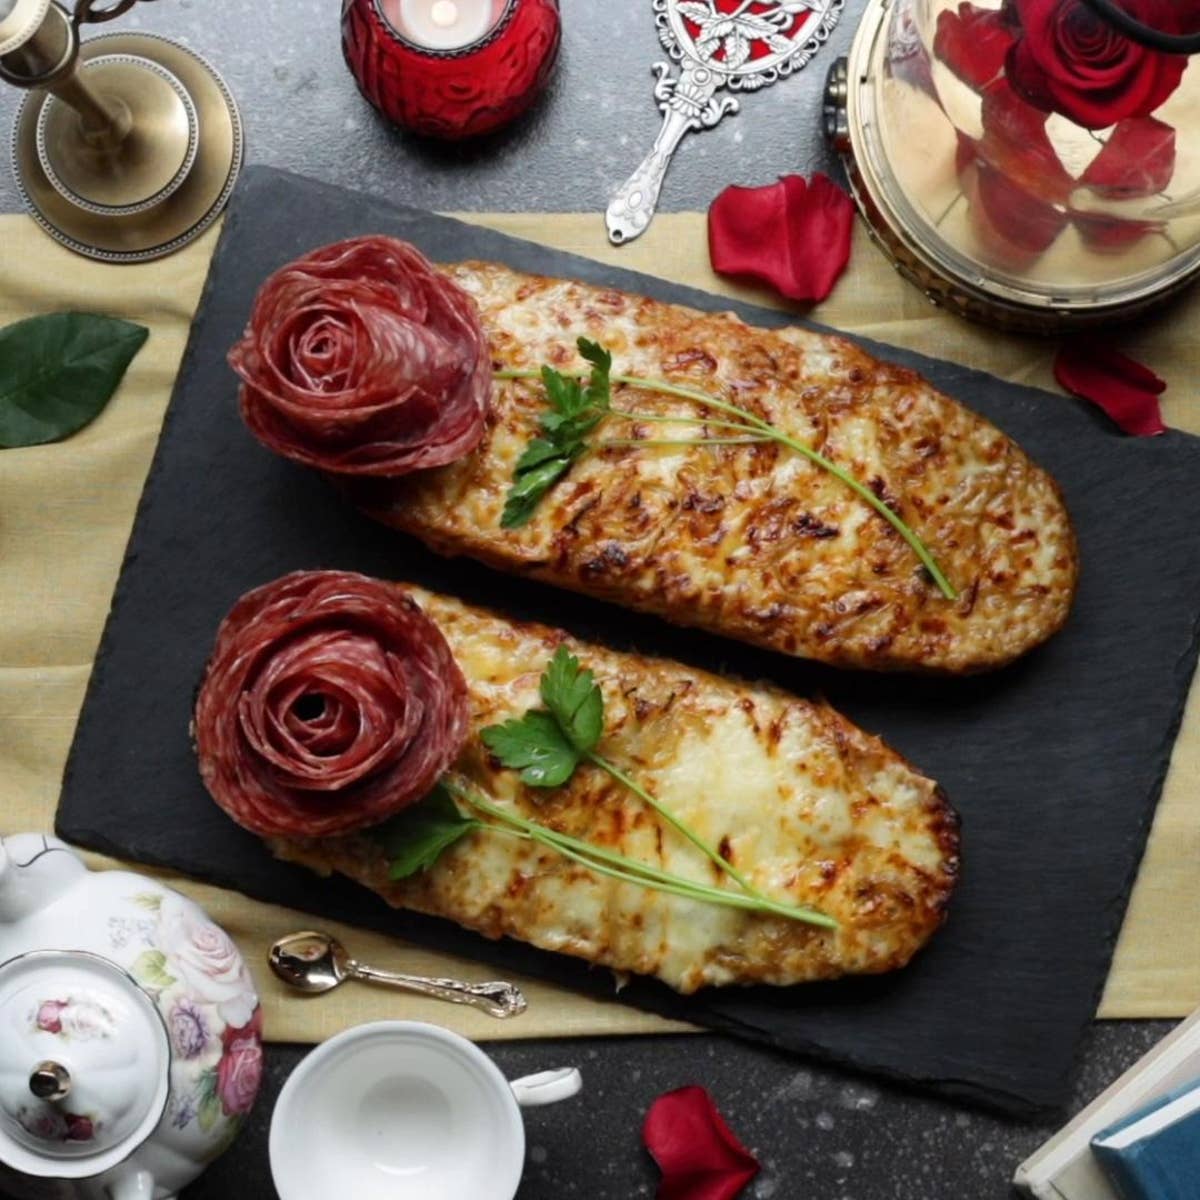 Beauty And The Beast-Inspired French Bread Pizza